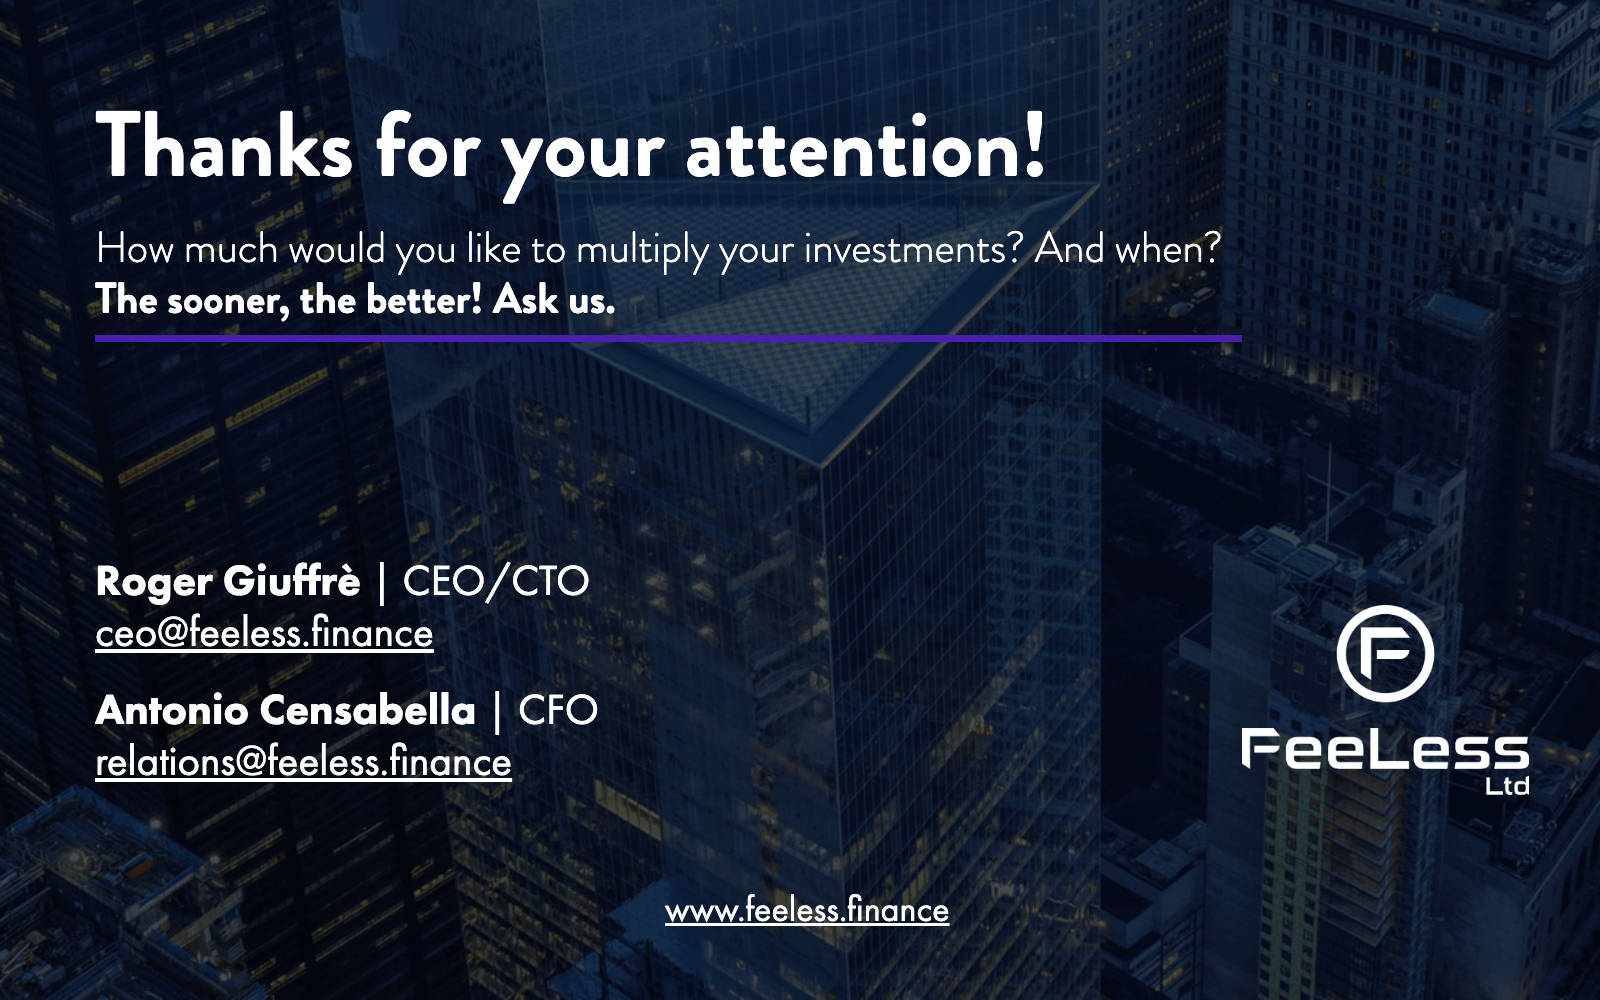 Contact FeeLess for Investment Enquiry